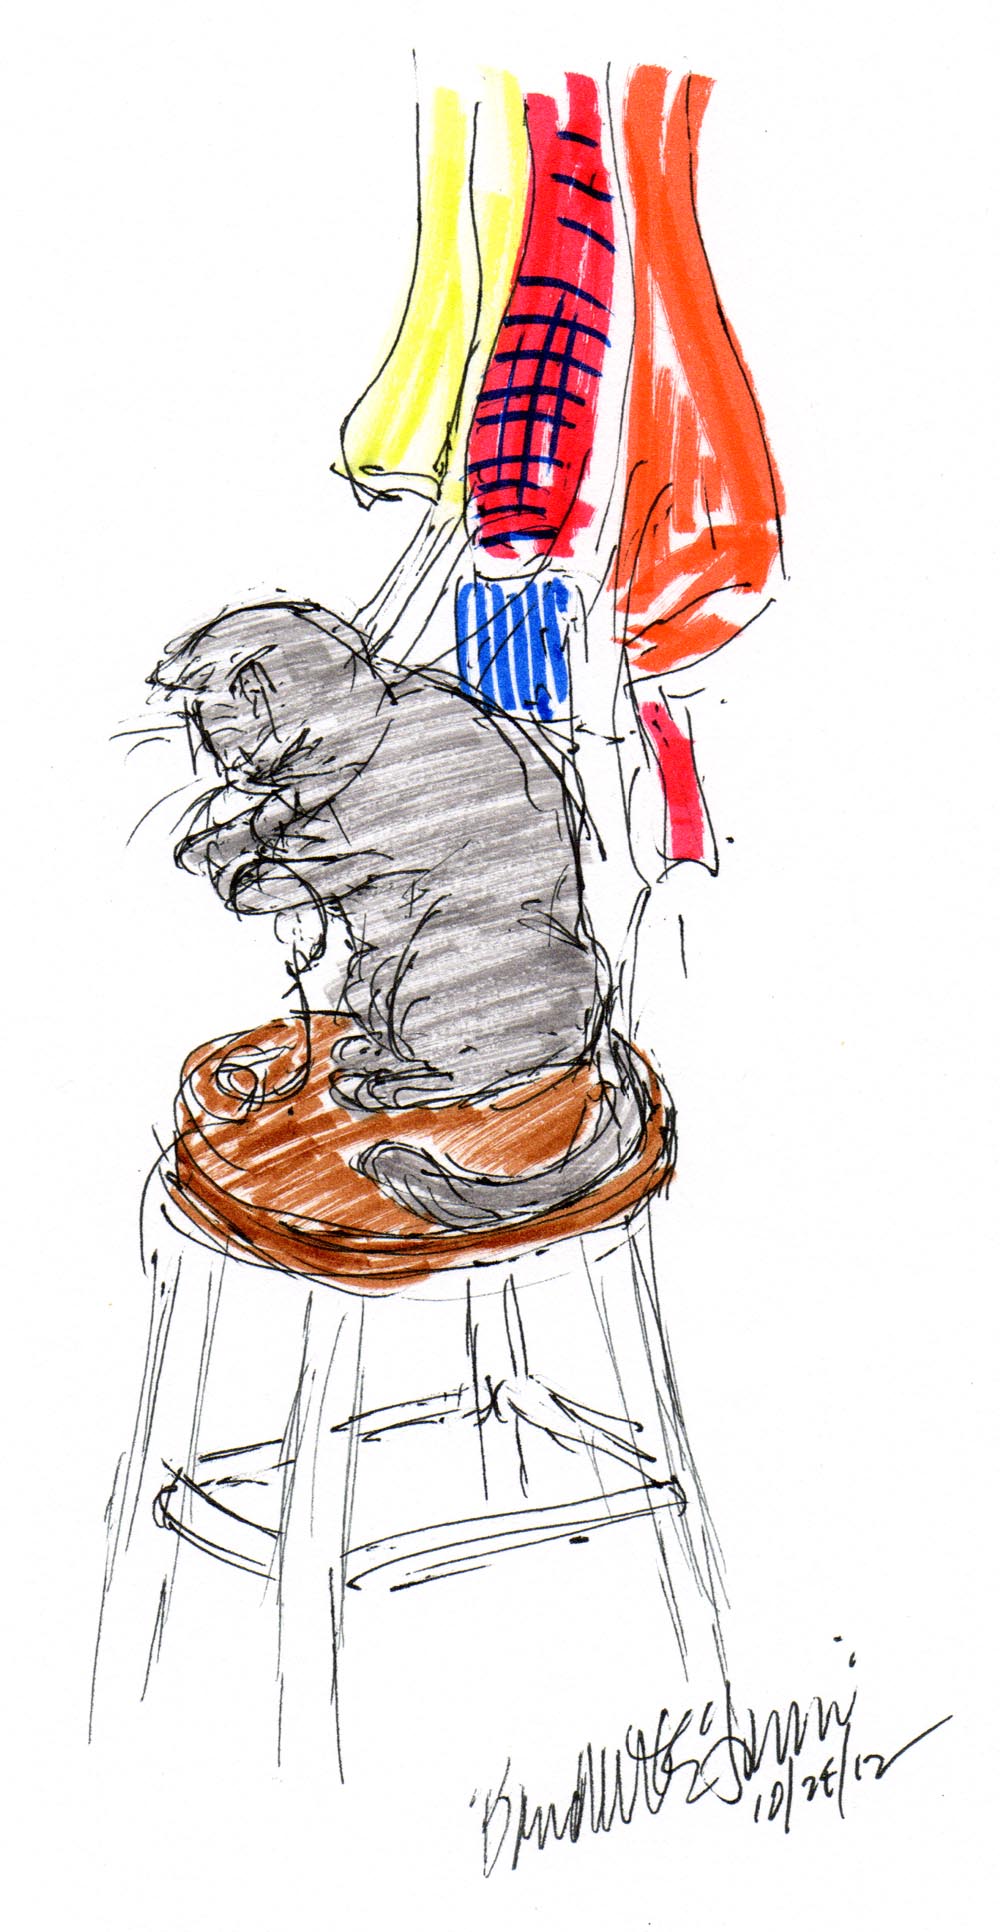 ink and marker sketch of cat with apron strings